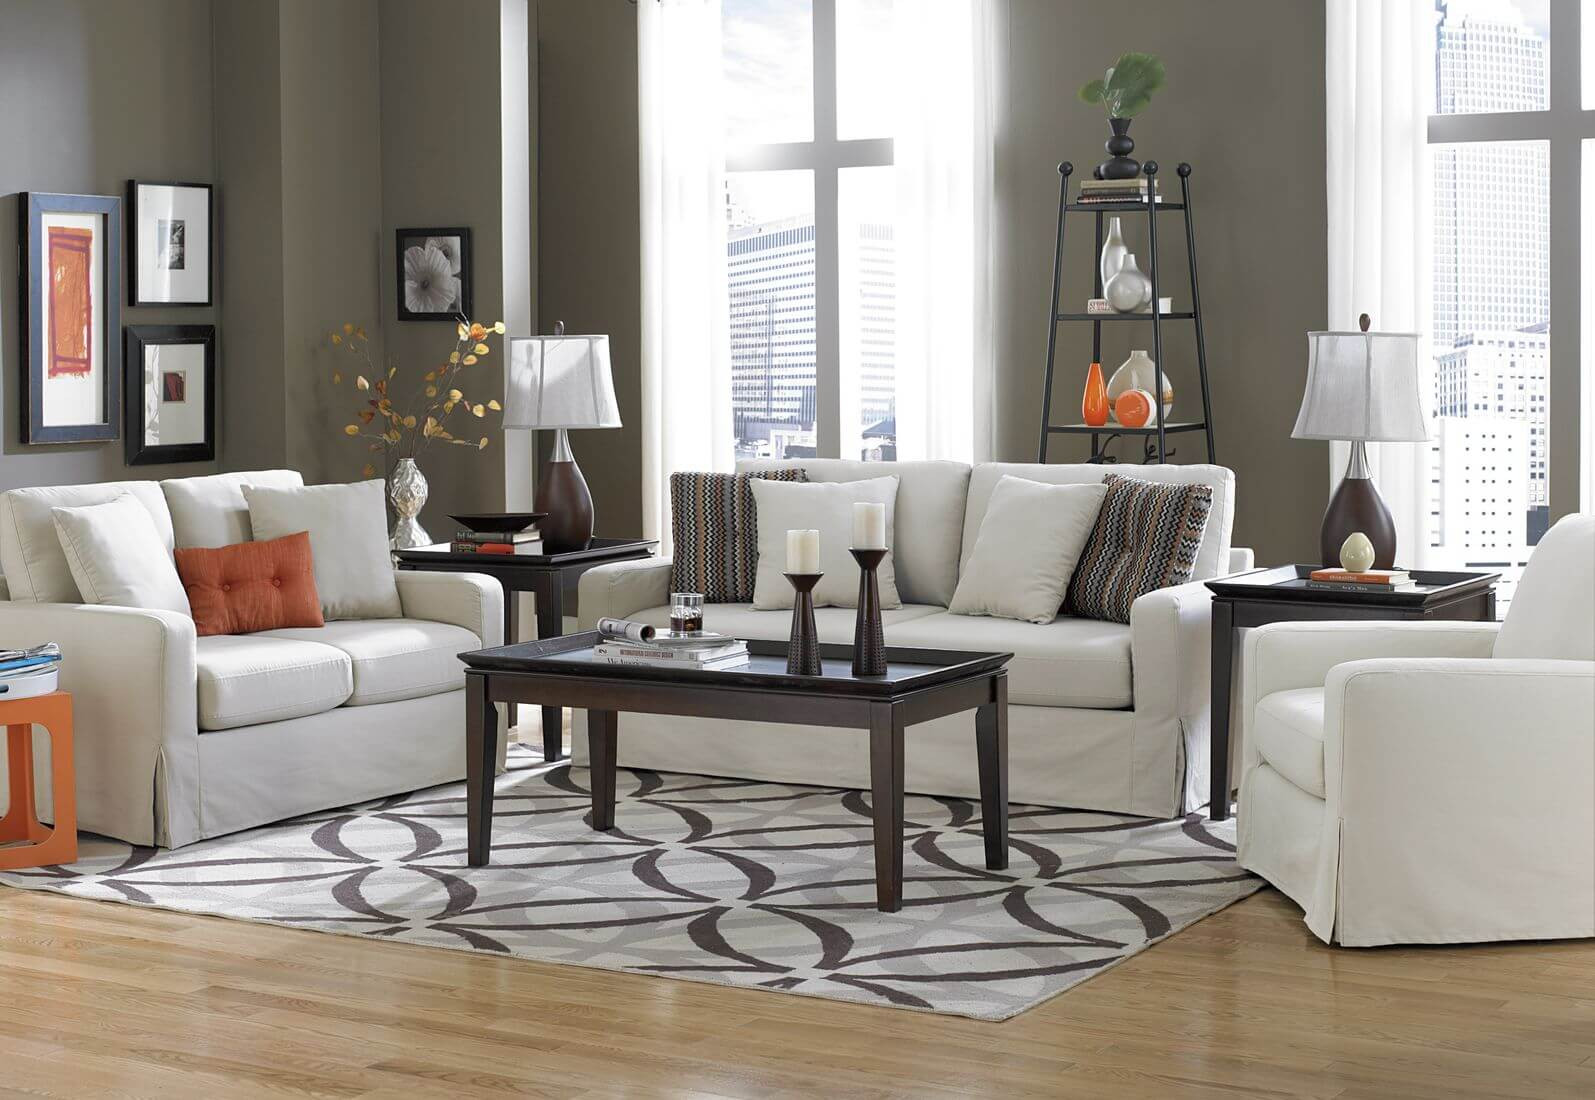 Rugs Living Room
 40 Living Rooms with Area Rugs for Warmth & Richness